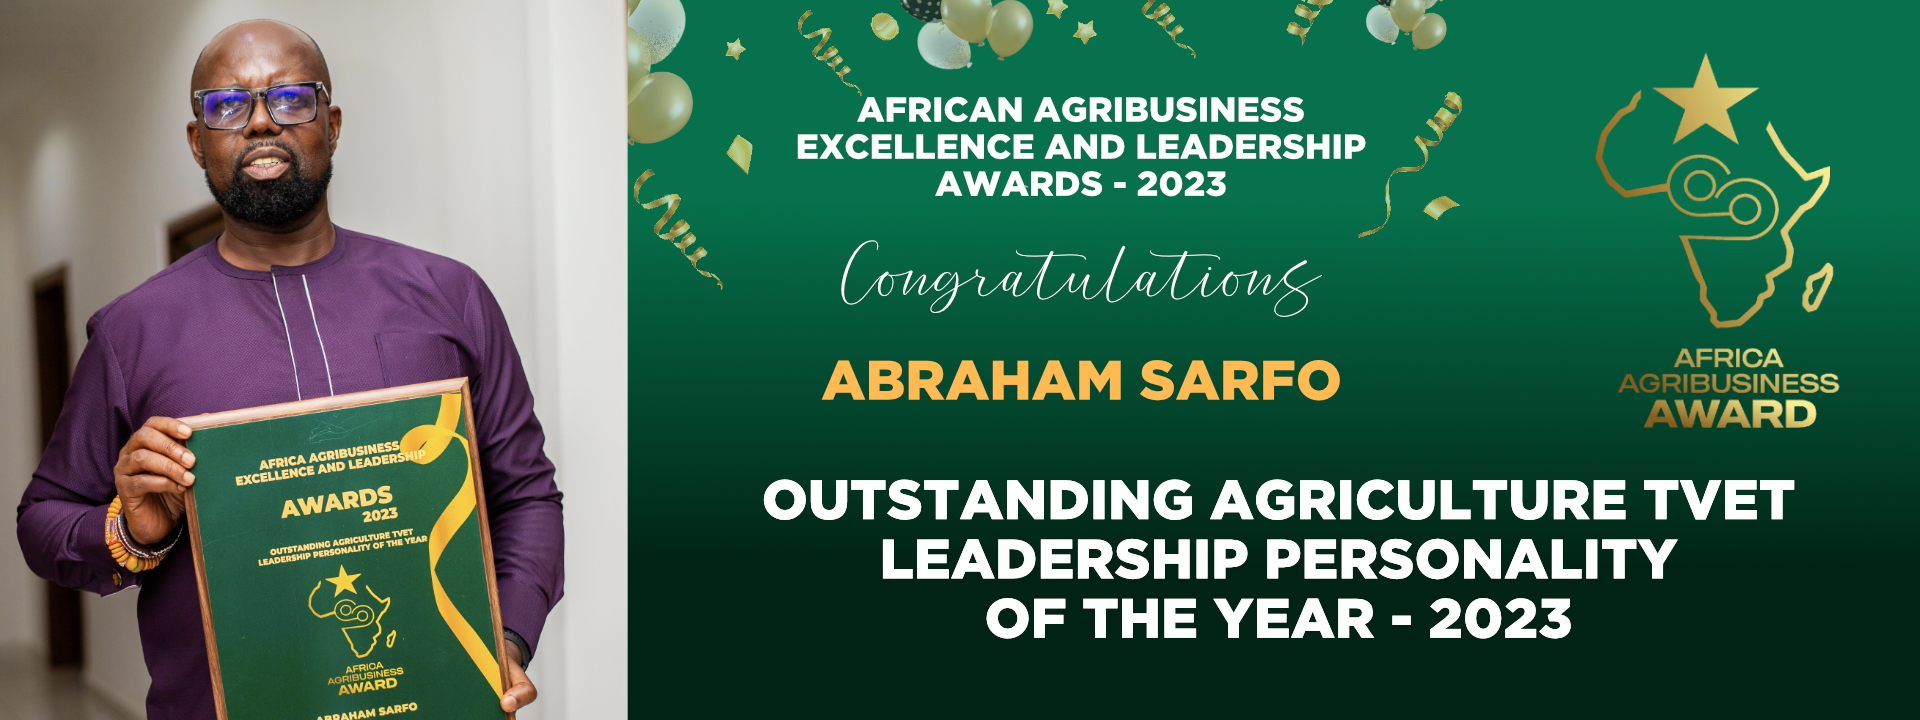 Outstanding Agriculture TVET Leadership Personality of the year - 2023